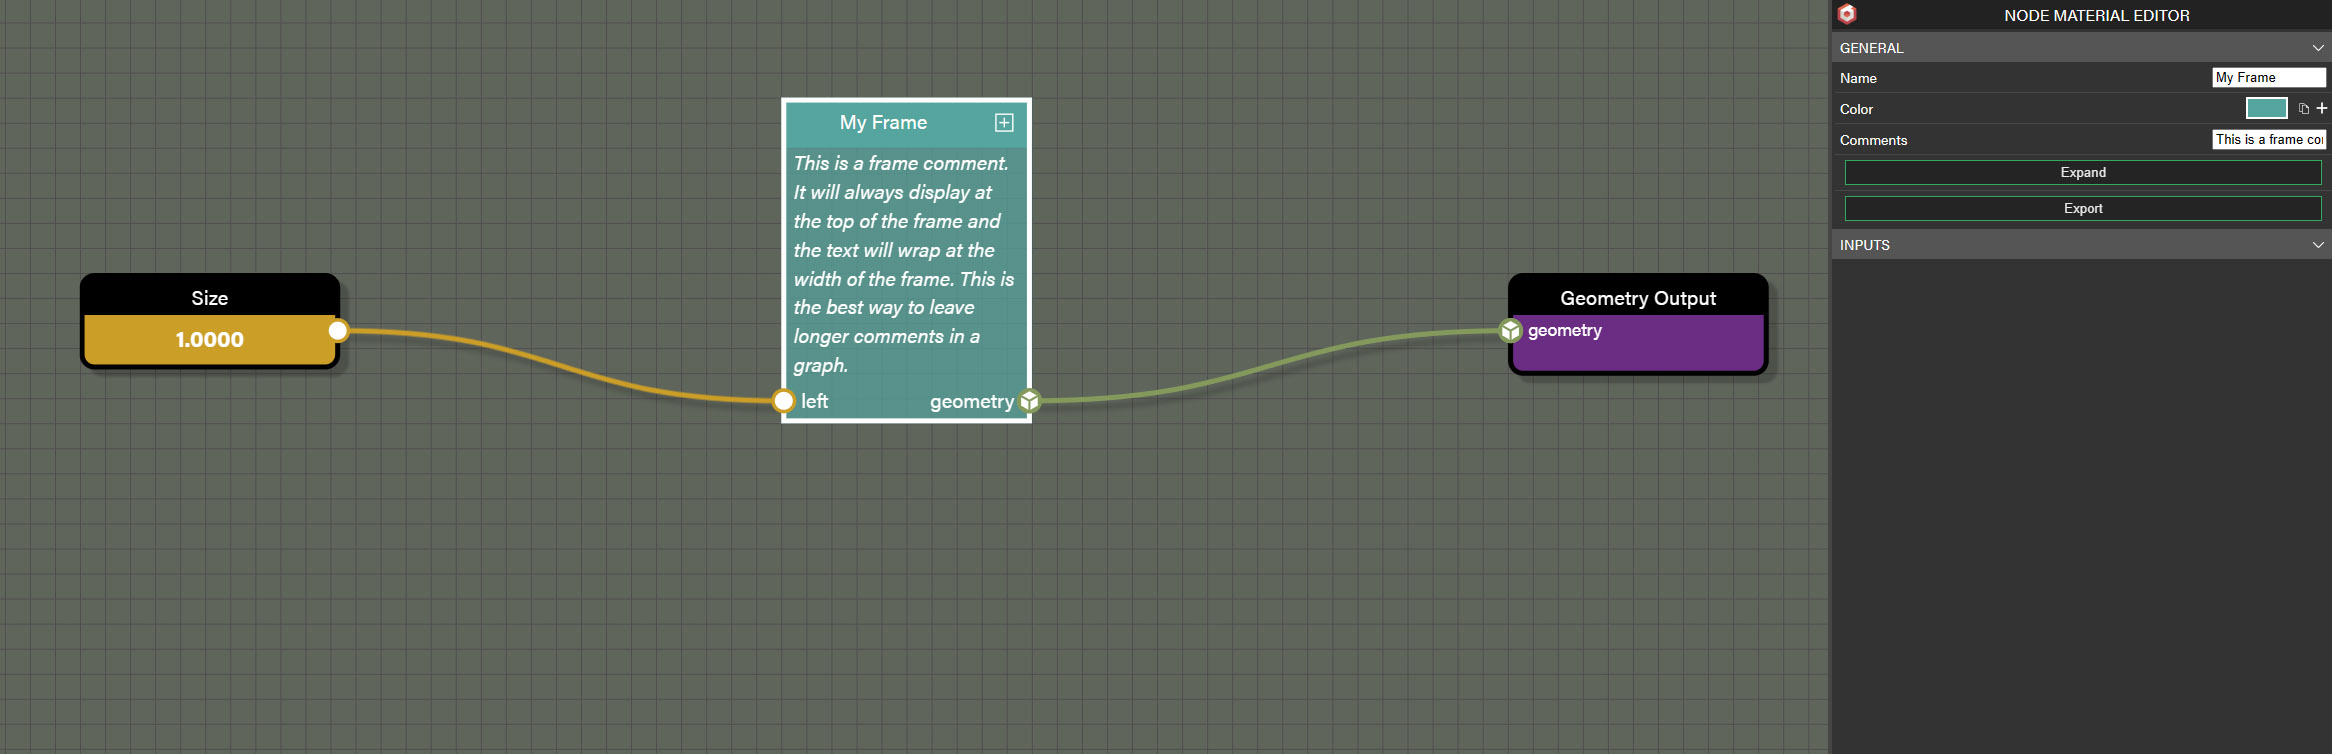 Frames can be collapsed to hide all nodes within and take up less space on the graph.